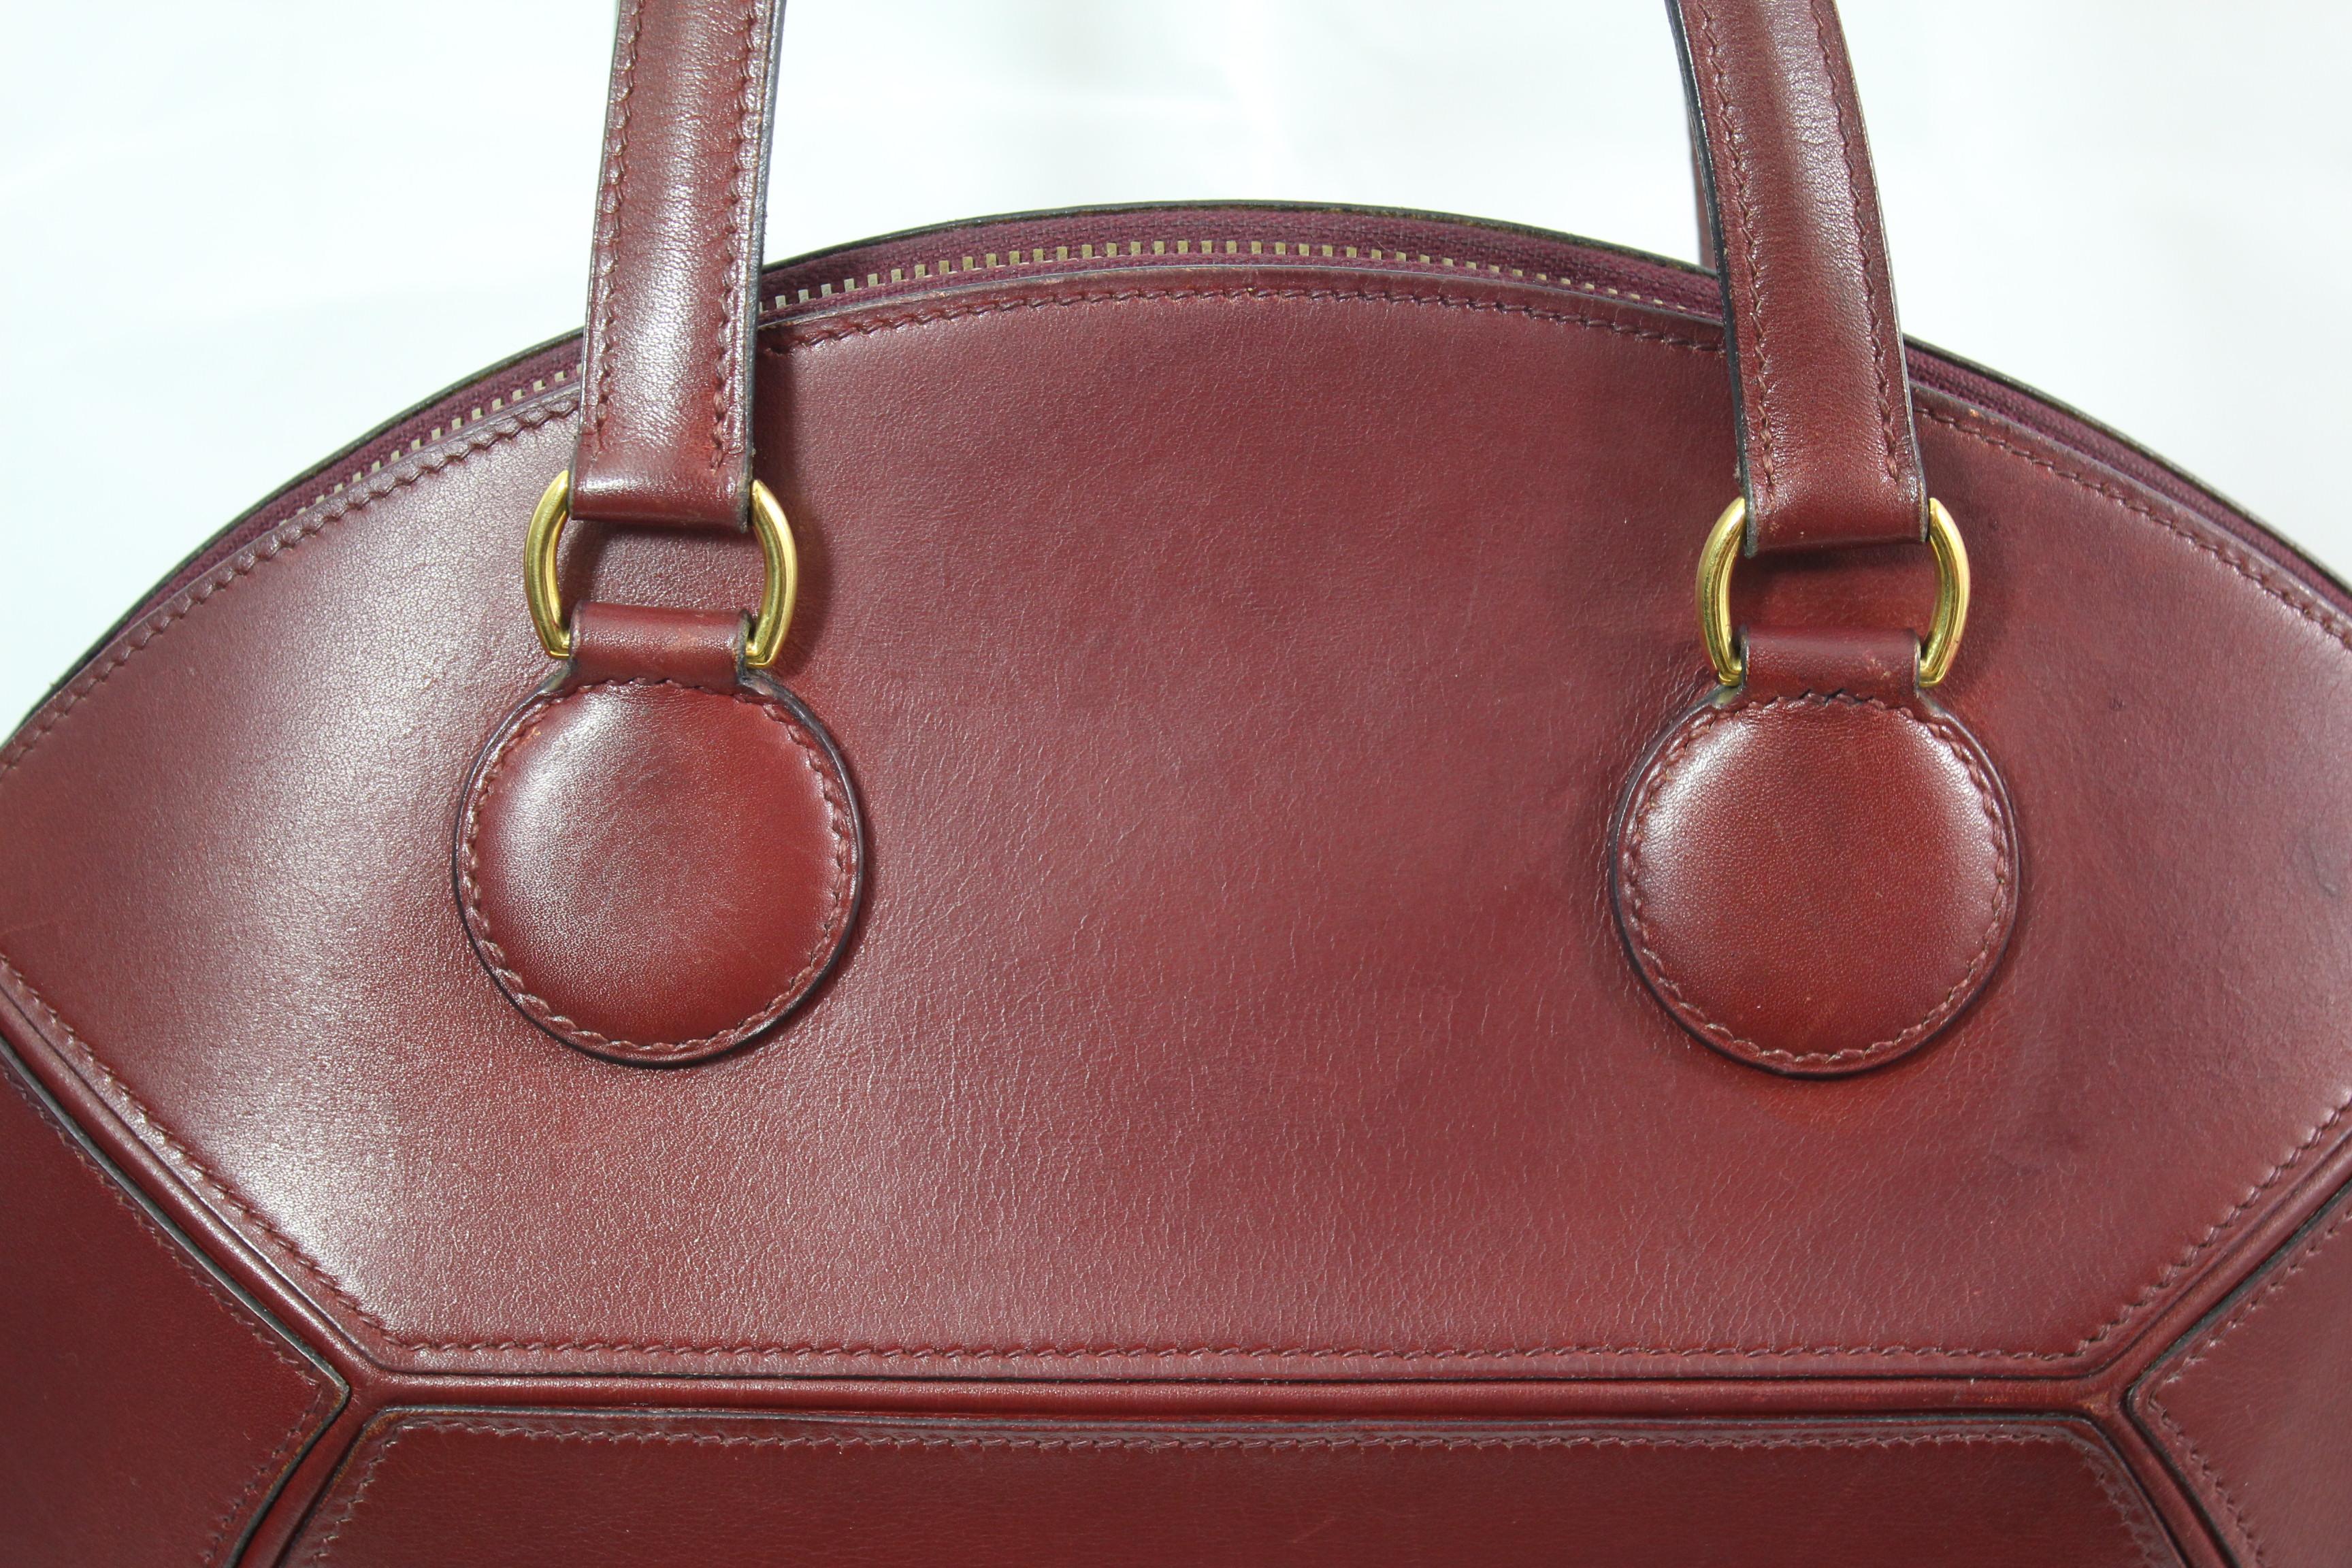 Hermes Vintage Ile de Shiki bag in burgundy box leather. Really good vintage condition, 
Used but no major defect. 
Clean interior. 
Size 9x11 inches or 24*28 cm